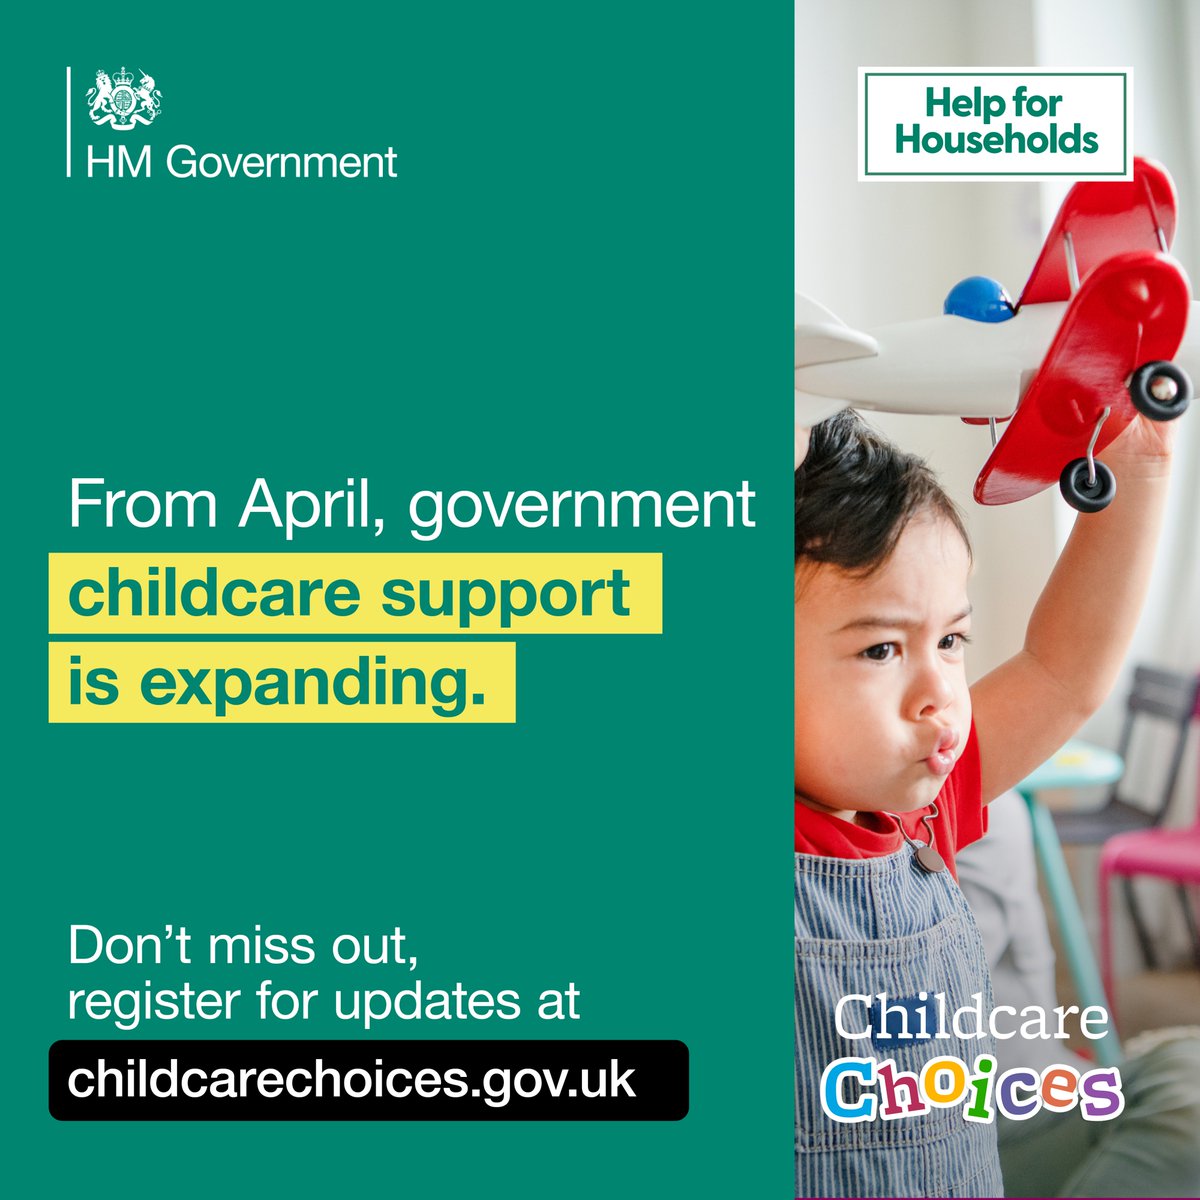 ❓Did you know that working parents of 2 year olds will have access to childcare support from April 2024? ❗️Applications will open for parents from January 2024. 👉Visit the Childcare Choices website to get more information & sign up for regular updates: childcarechoices.gov.uk